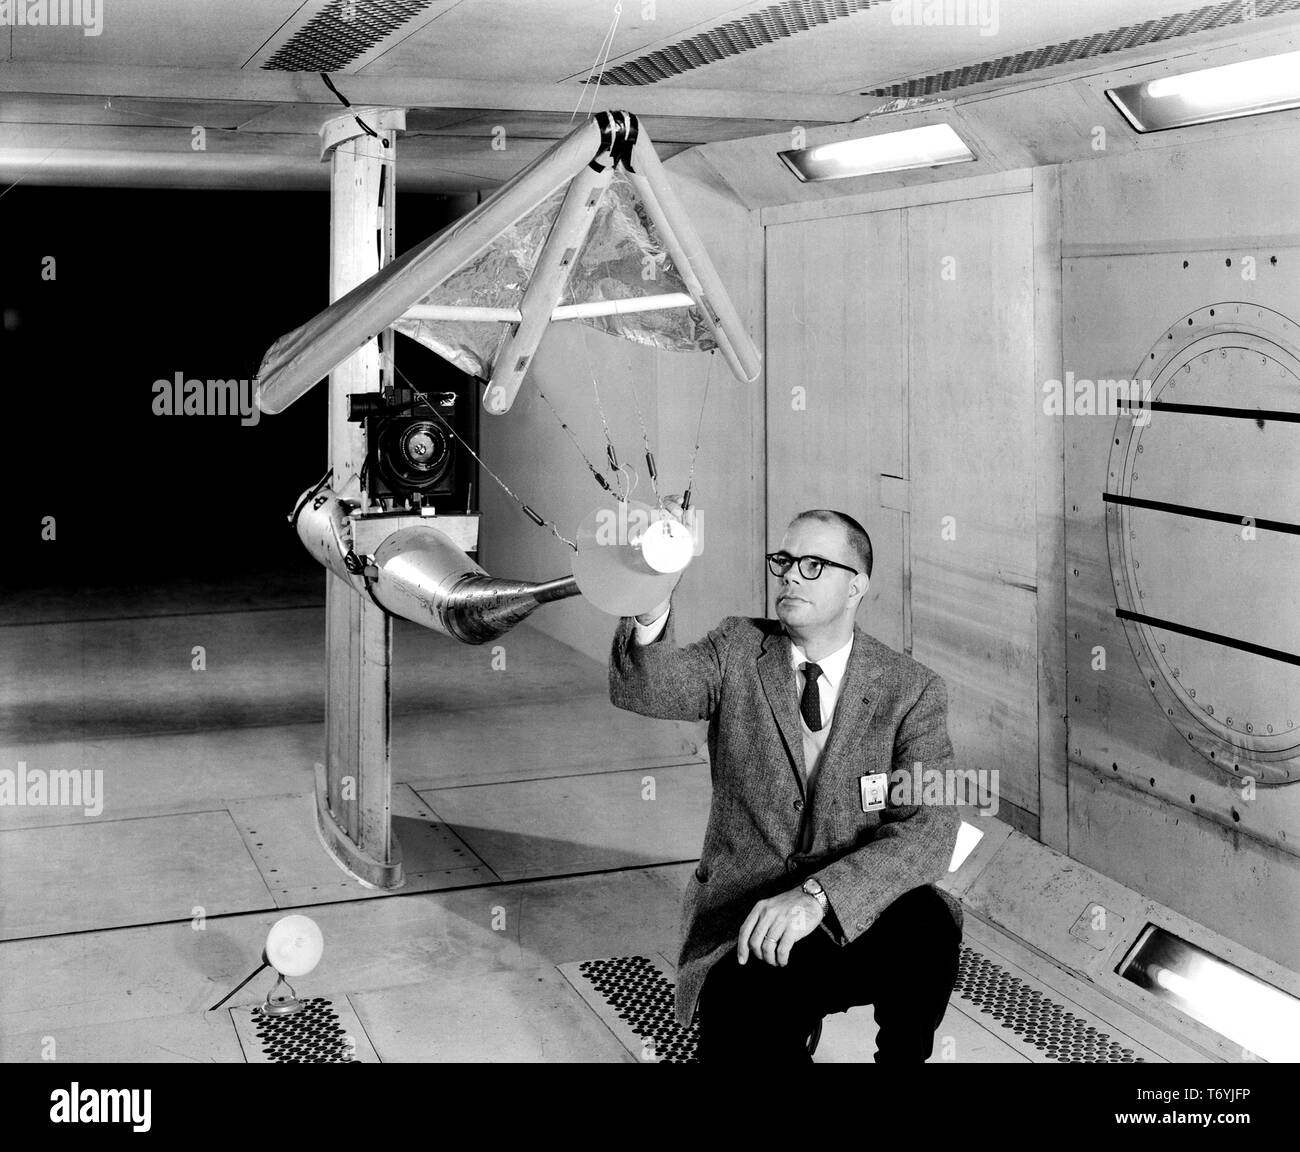 WC Sleeman, Jr inspecting a model of the 'Rogallo Wing' paraglider in wind tunnel at Langley Research Center, Hampton, Virginia, February 5, 1962. Image courtesy National Aeronautics and Space Administration (NASA). () Stock Photo